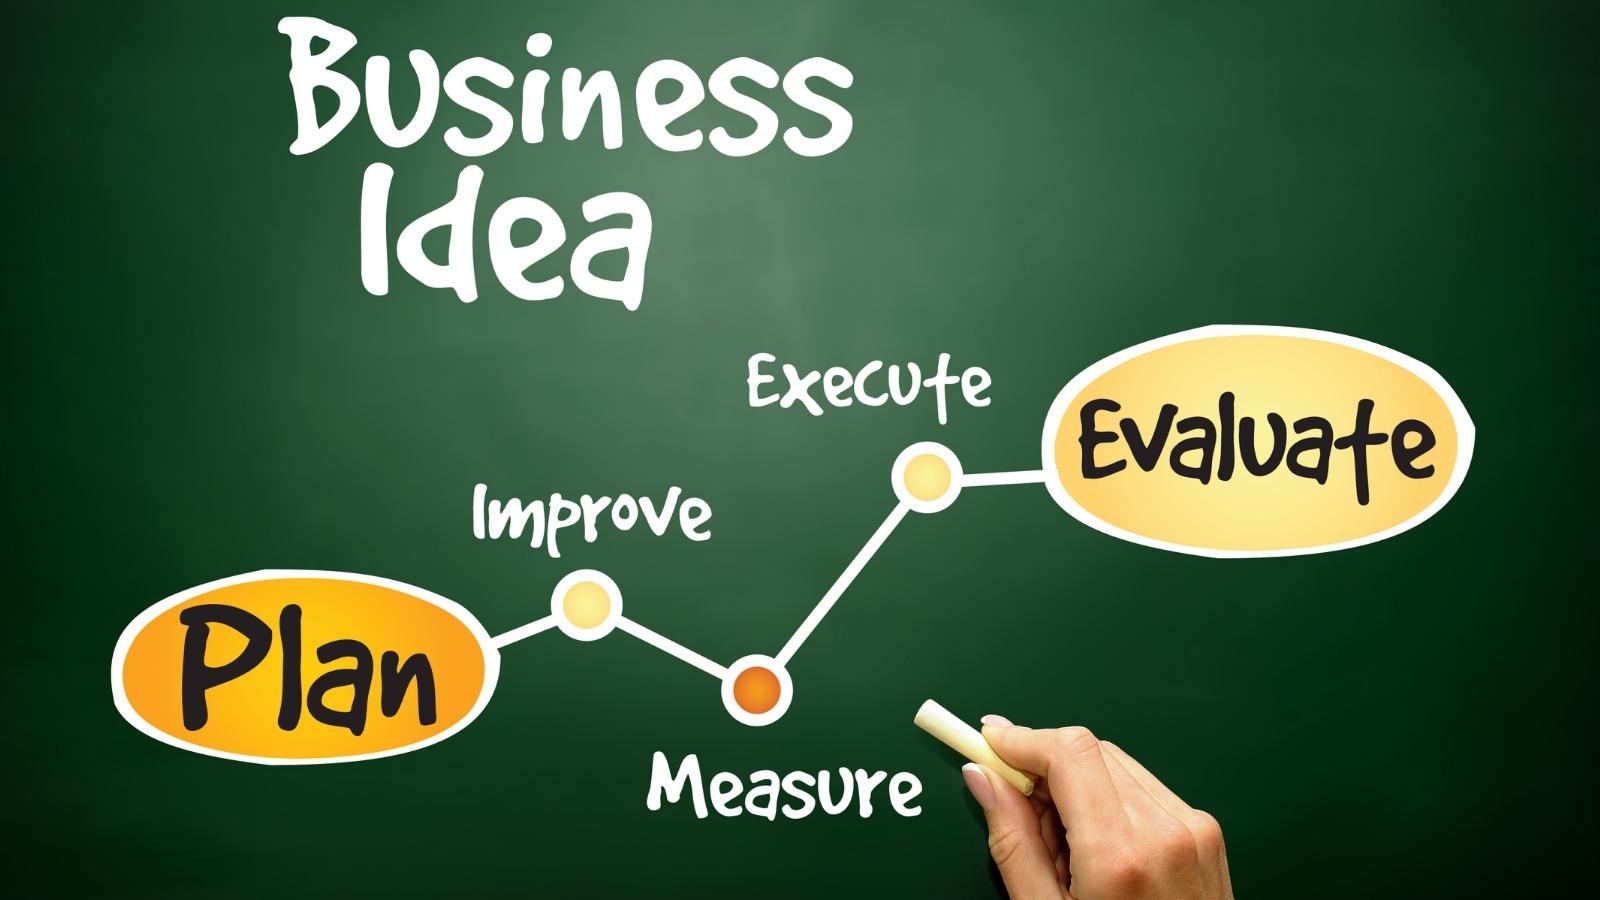 execute your business idea now